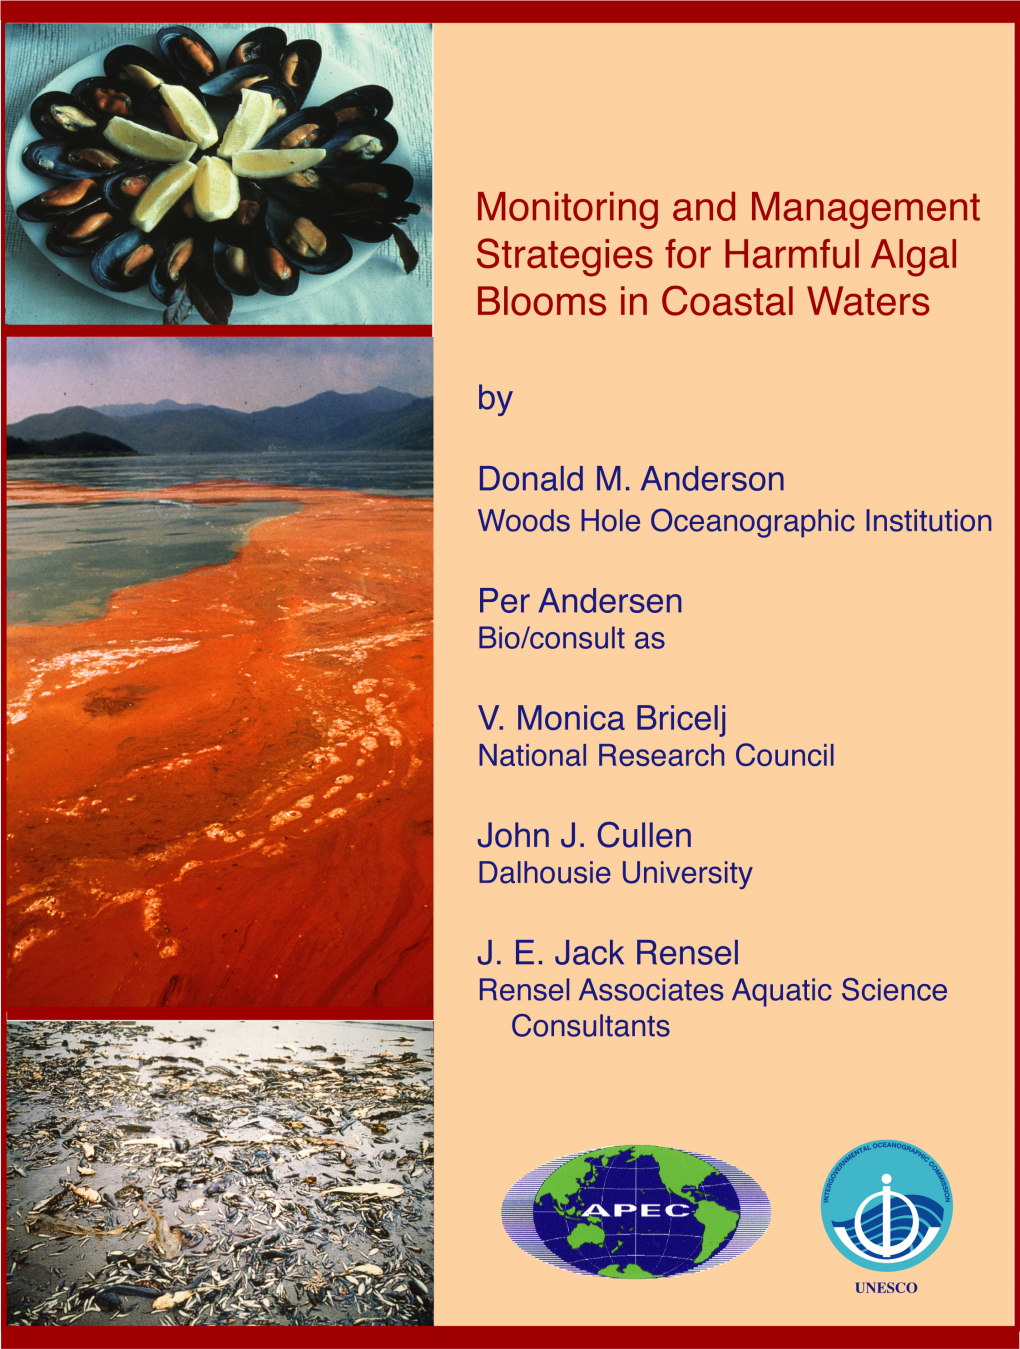 Monitoring and Management Strategies for Harmful Algal Blooms in Coastal Waters